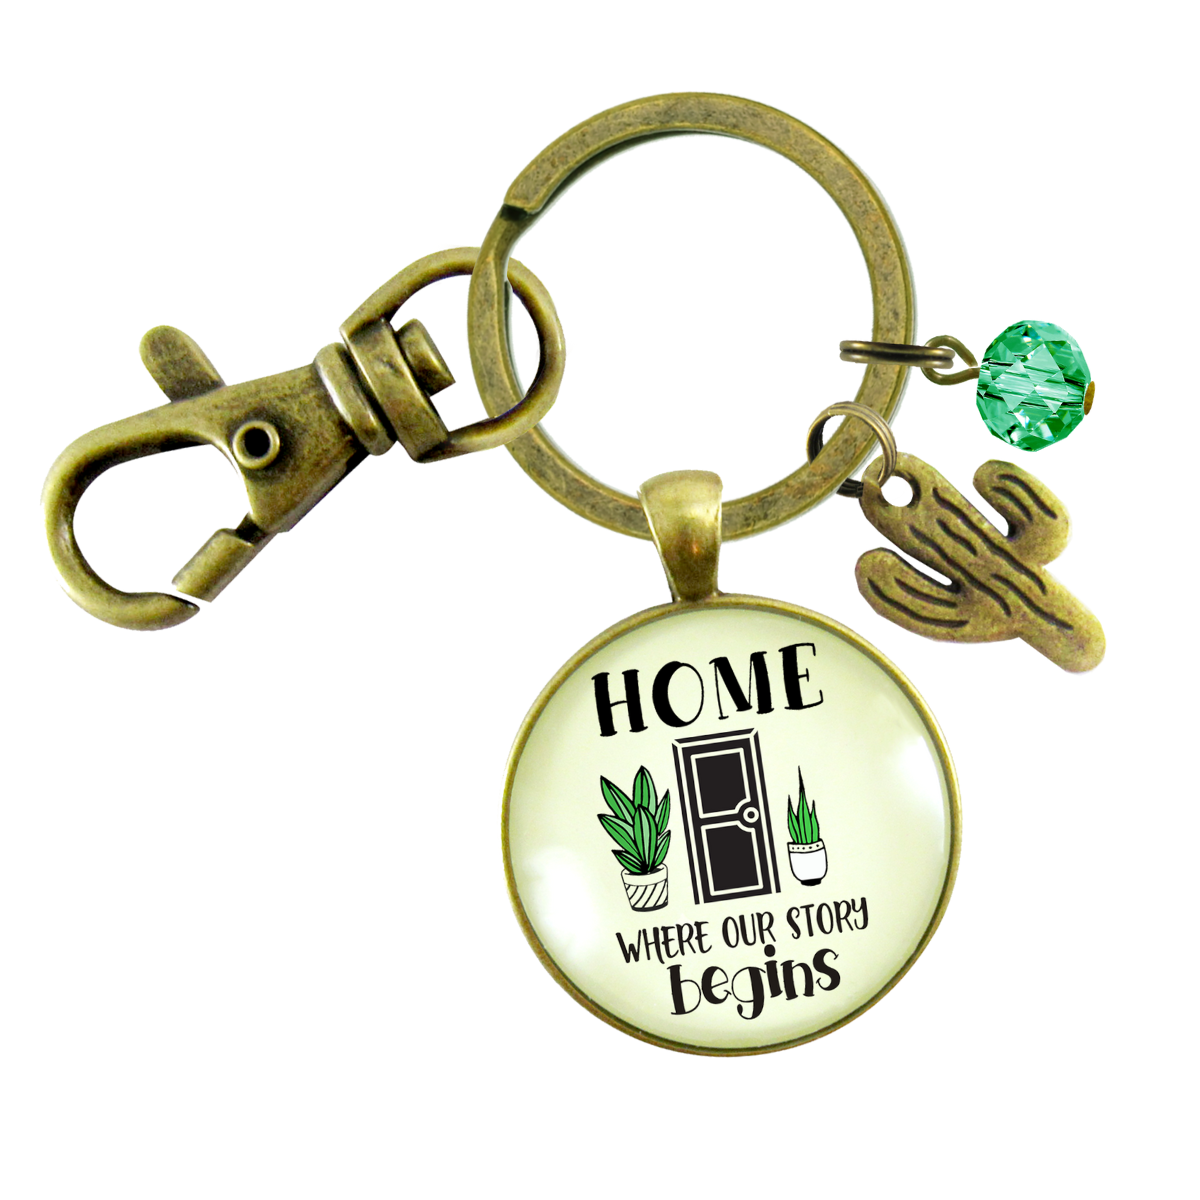 Our First Home Keychain Where Our Story Begins Texas Arizona Inspired Housewarming Gift  Keychain - Unisex - Gutsy Goodness Handmade Jewelry